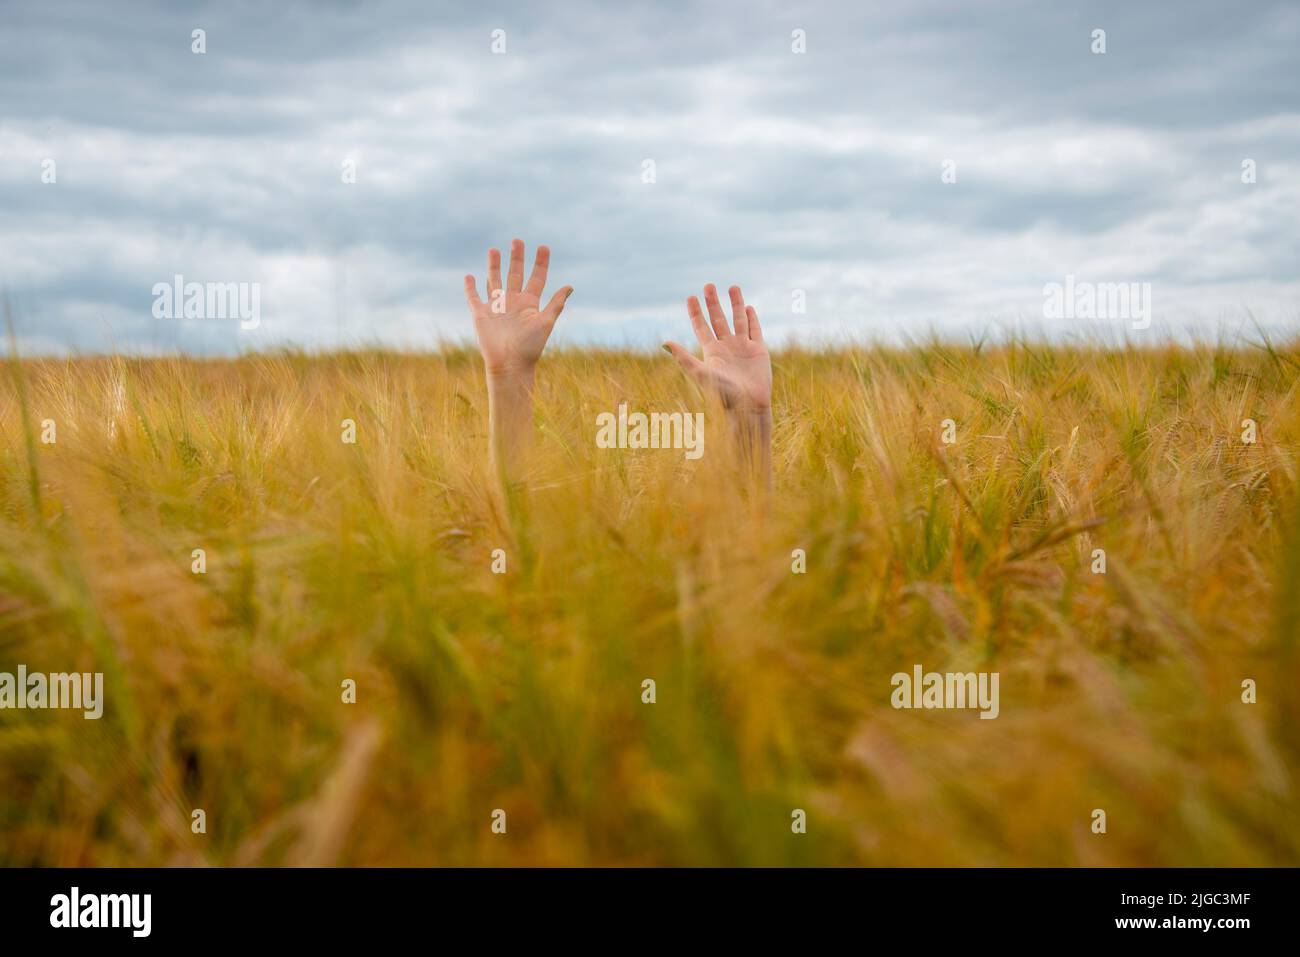 Hands appearing out of a field, concept. Stock Photo